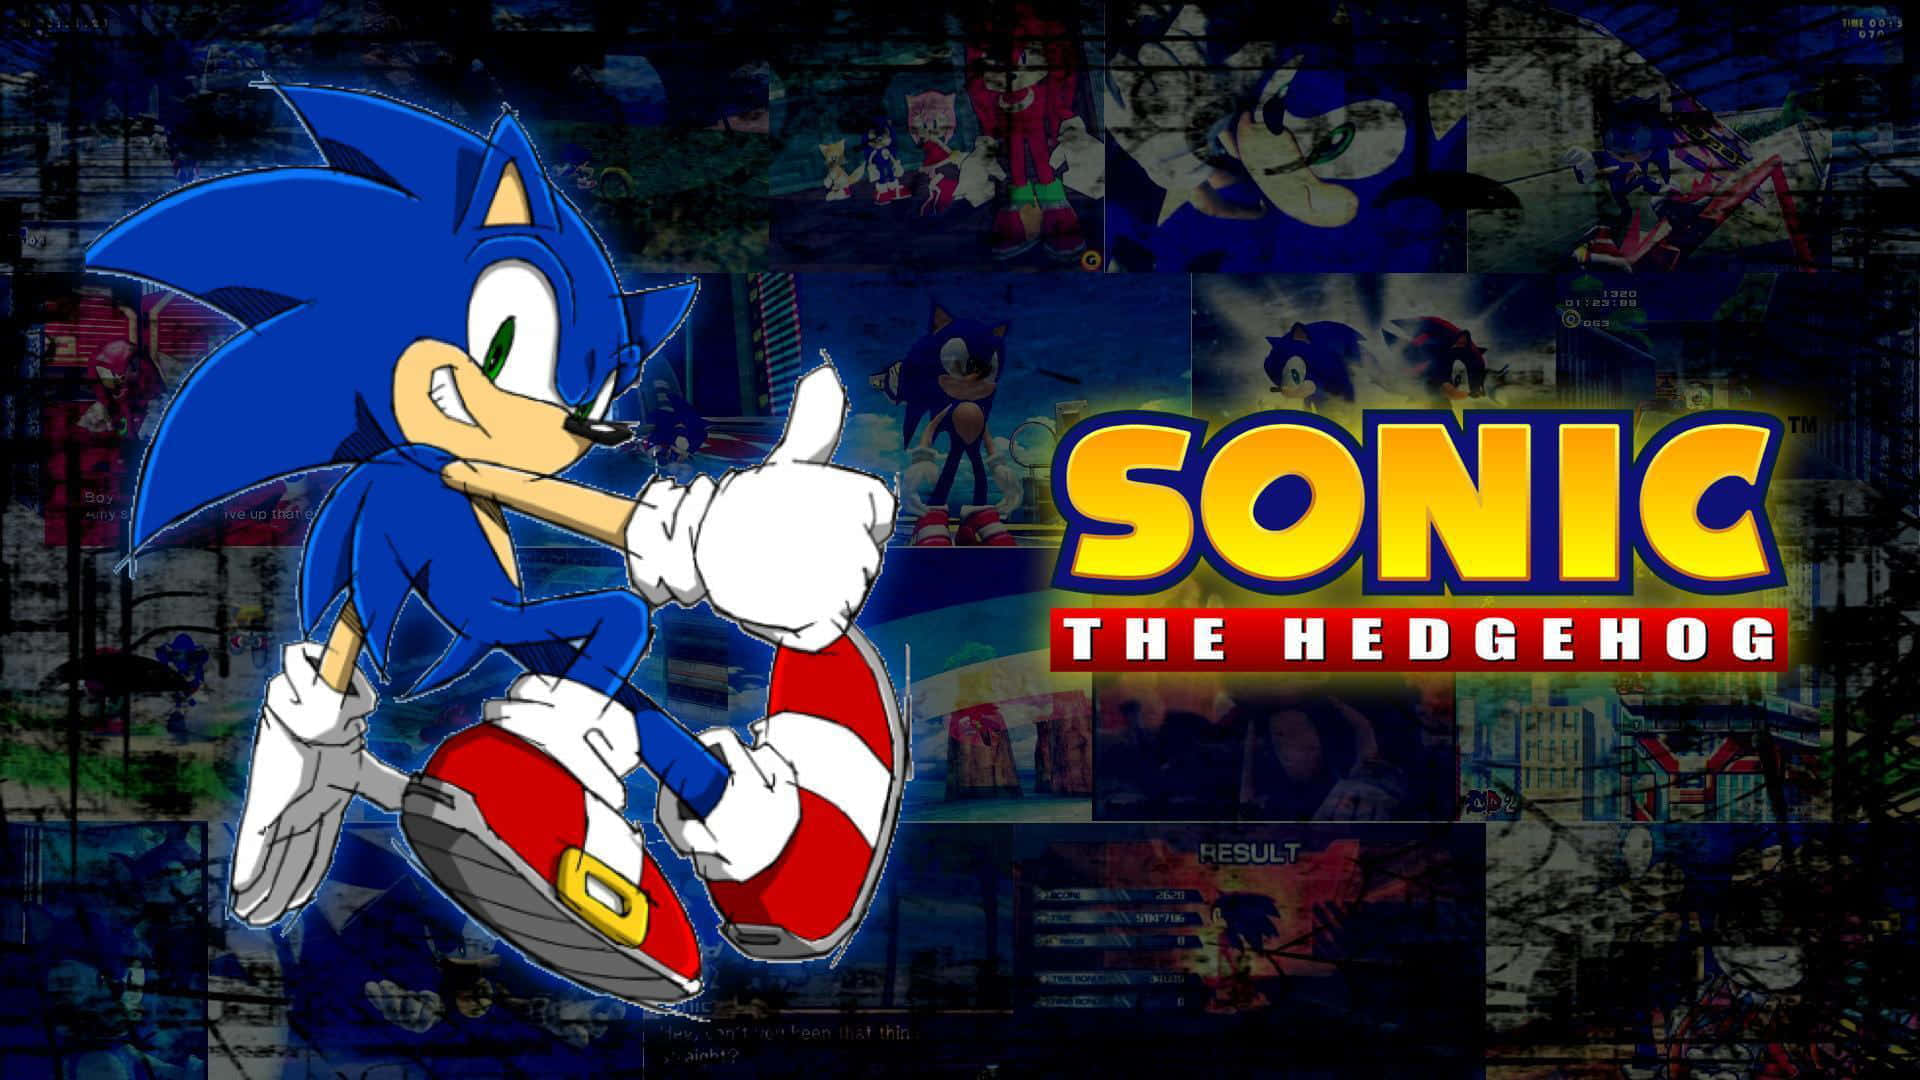 Modern Sonic the Hedgehog in action Wallpaper